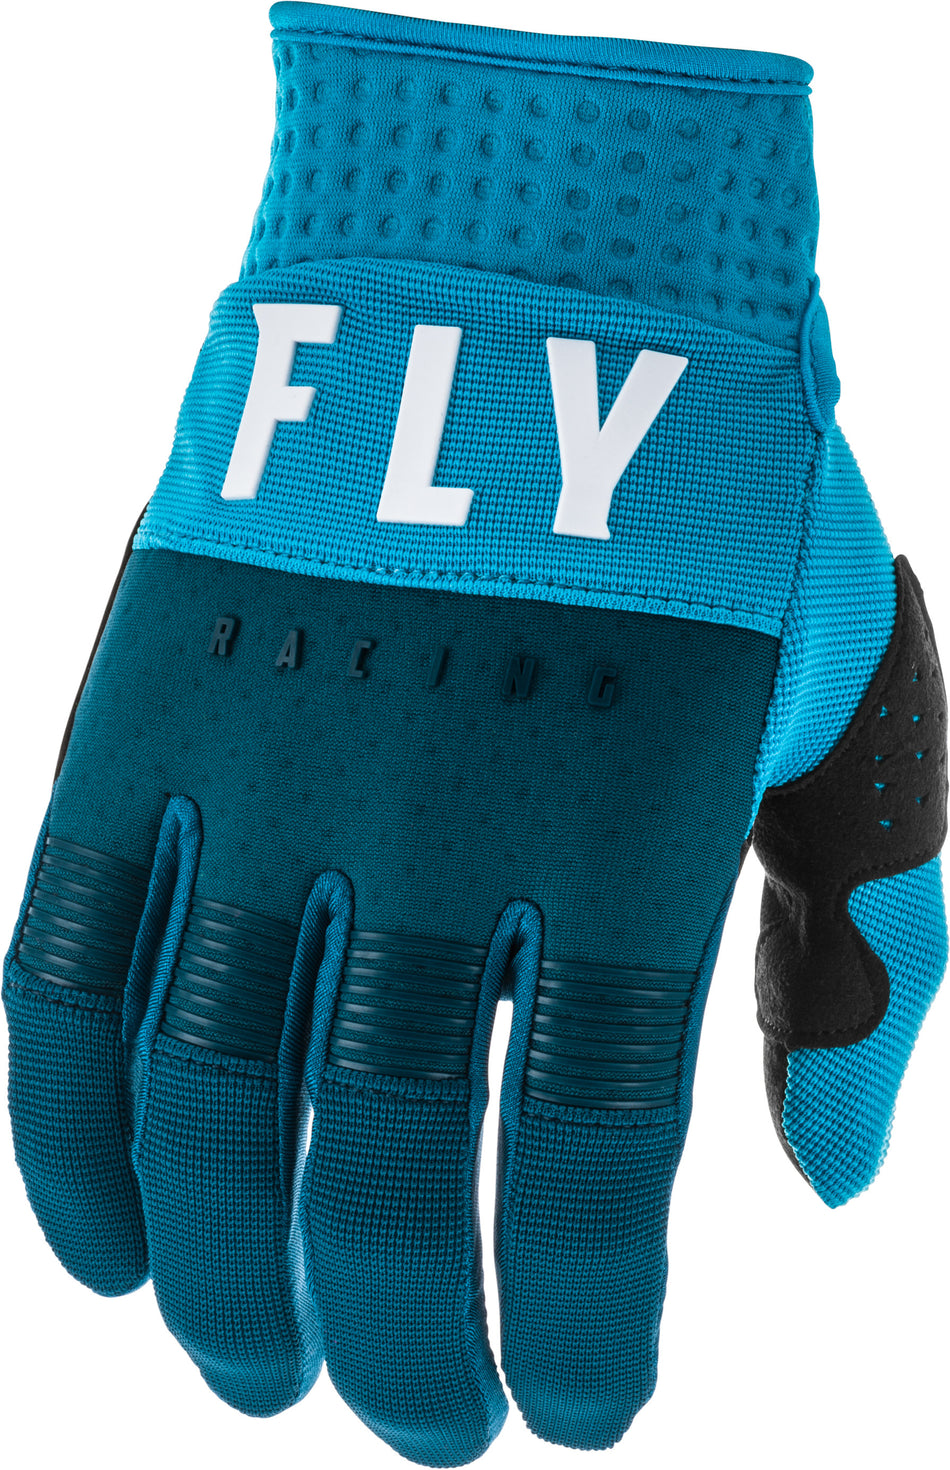 FLY RACING F-16 Gloves Navy/Blue/White Sz 01 373-91101